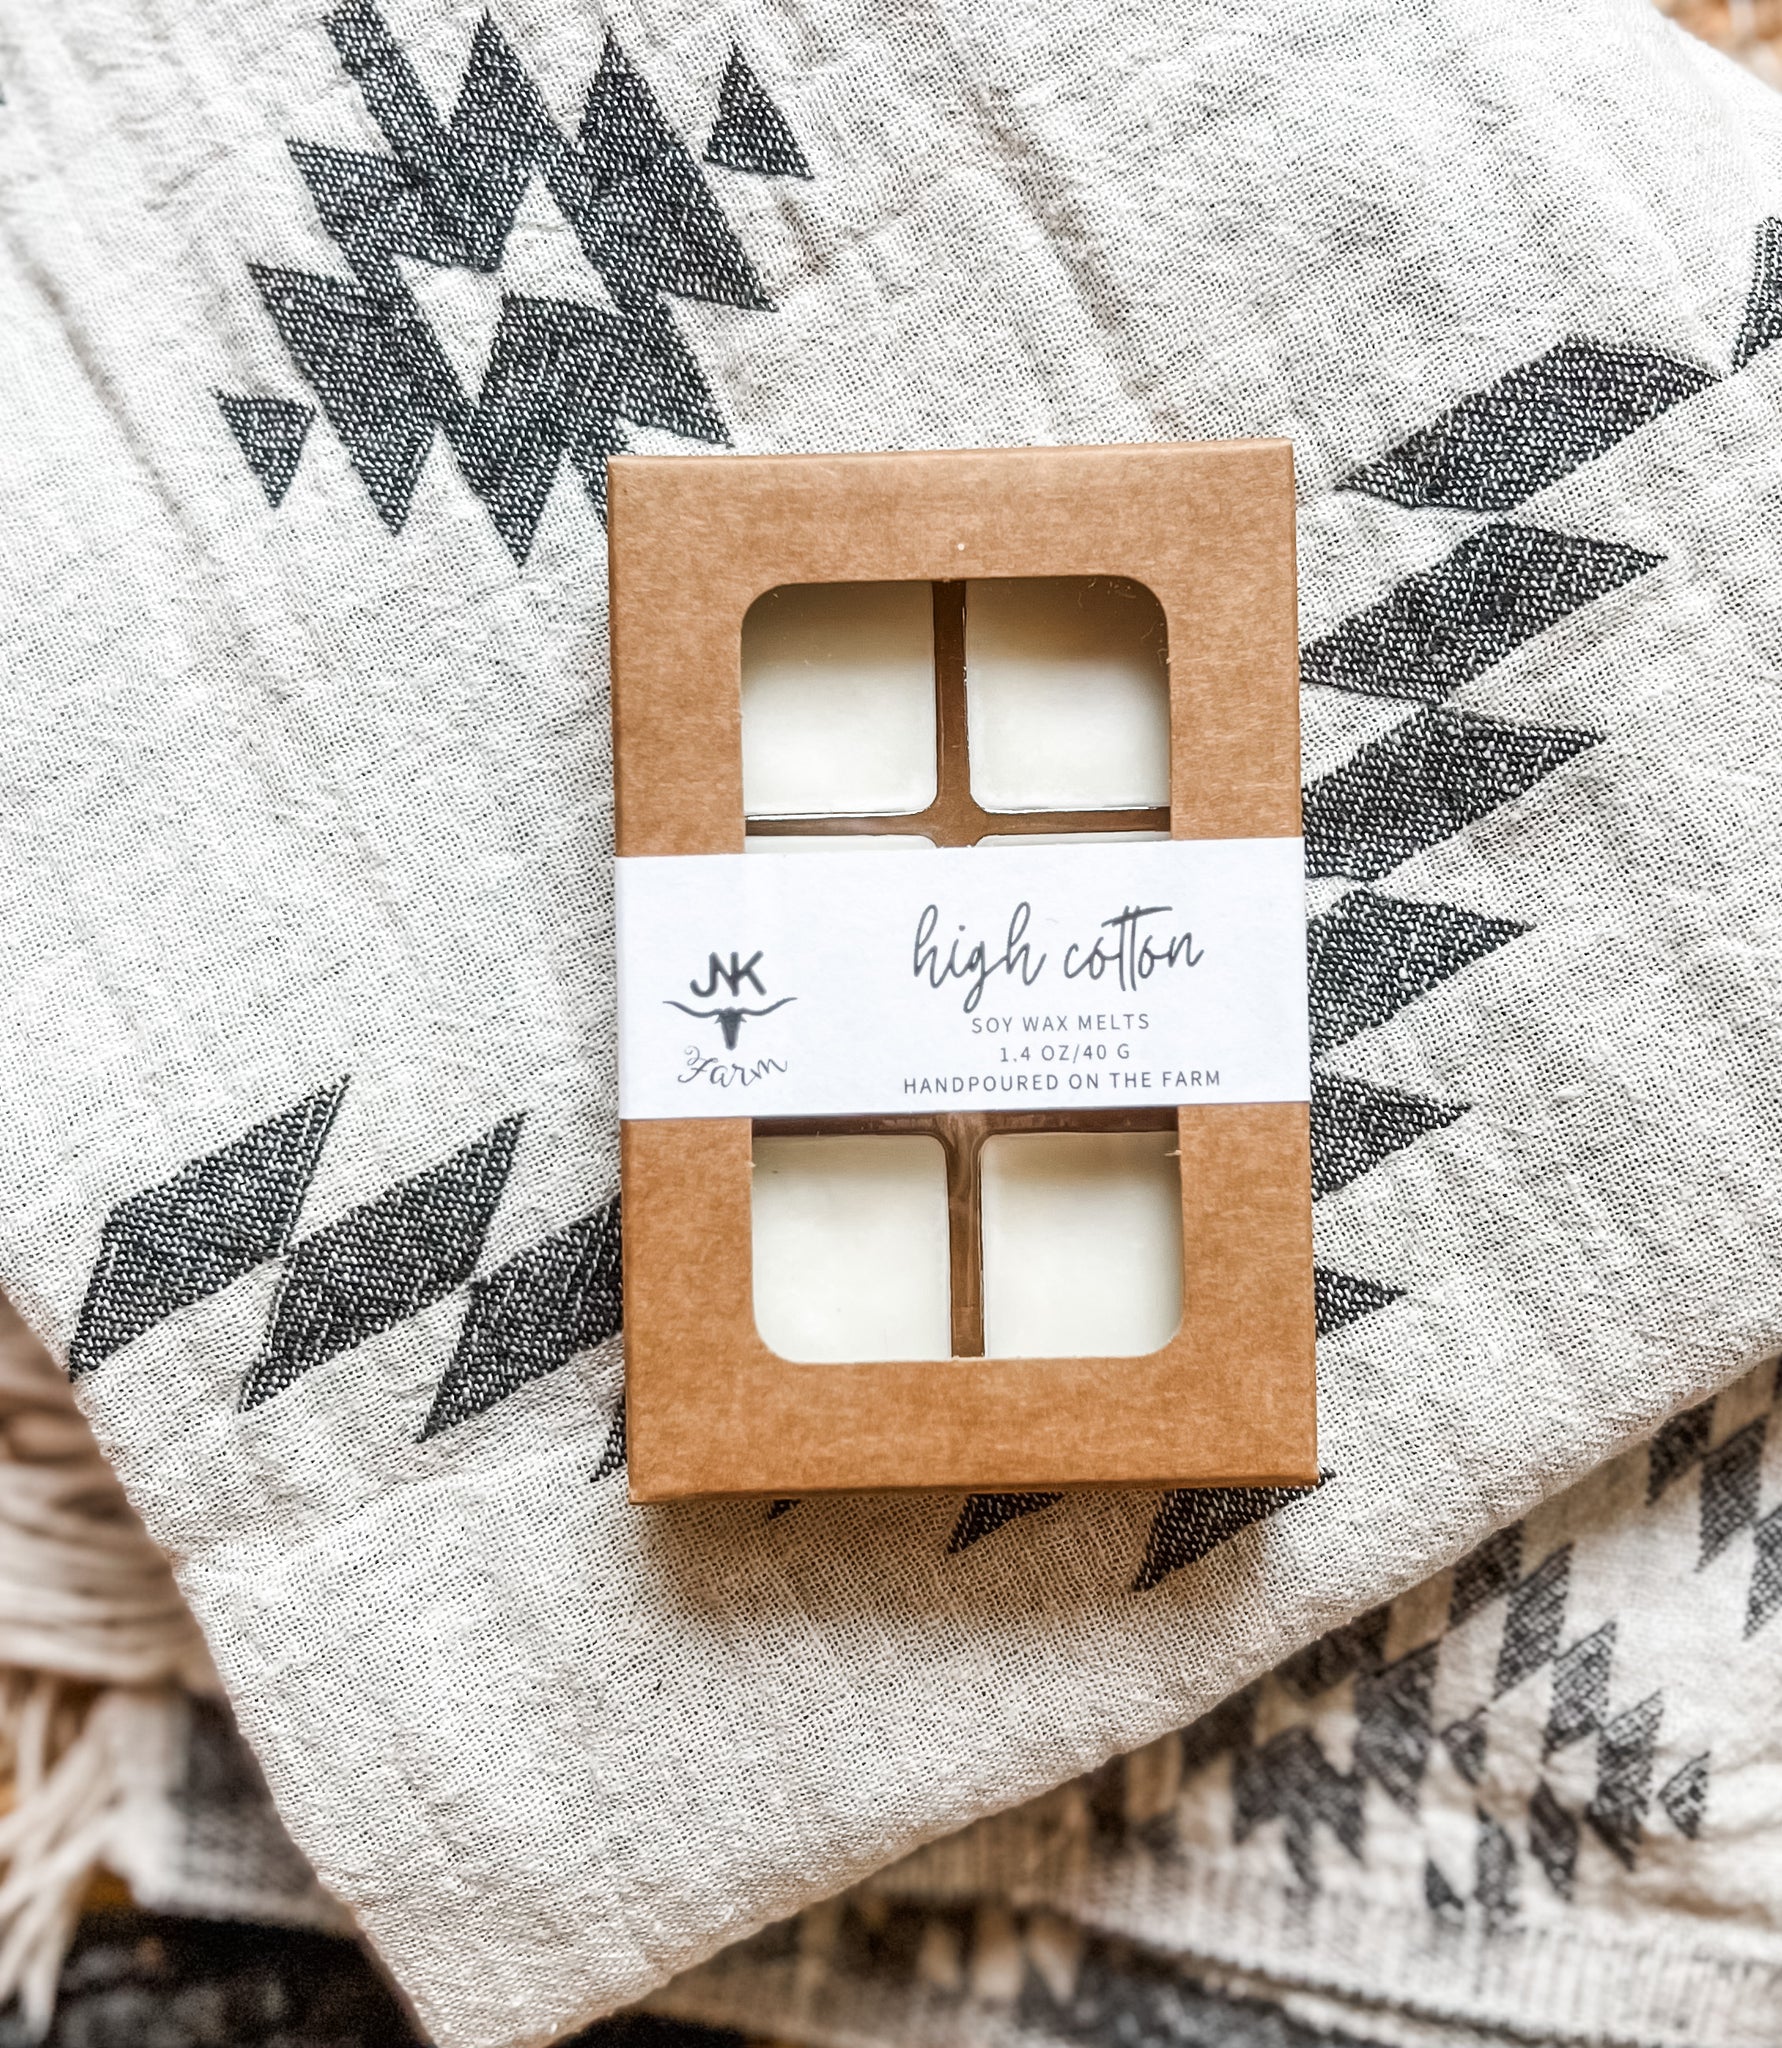 Like fresh, clean linens on a sunny day! All natural soy wax, hand-poured in a 6 pack of wax melts.